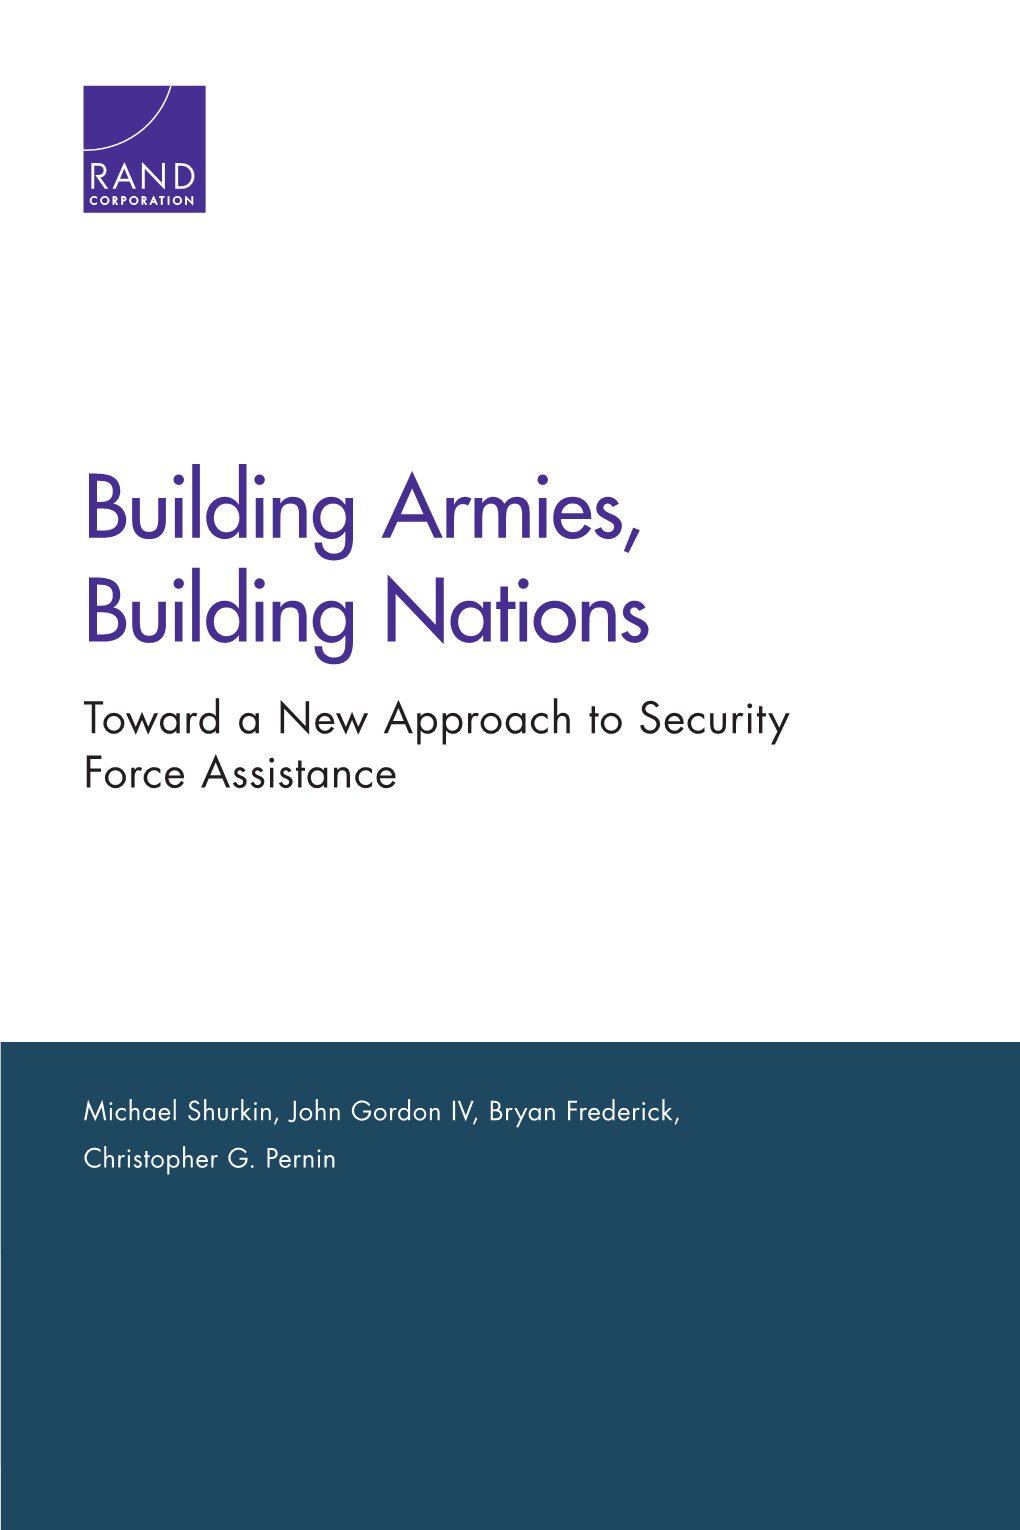 Building Armies, Building Nations: Toward a New Approach to Security